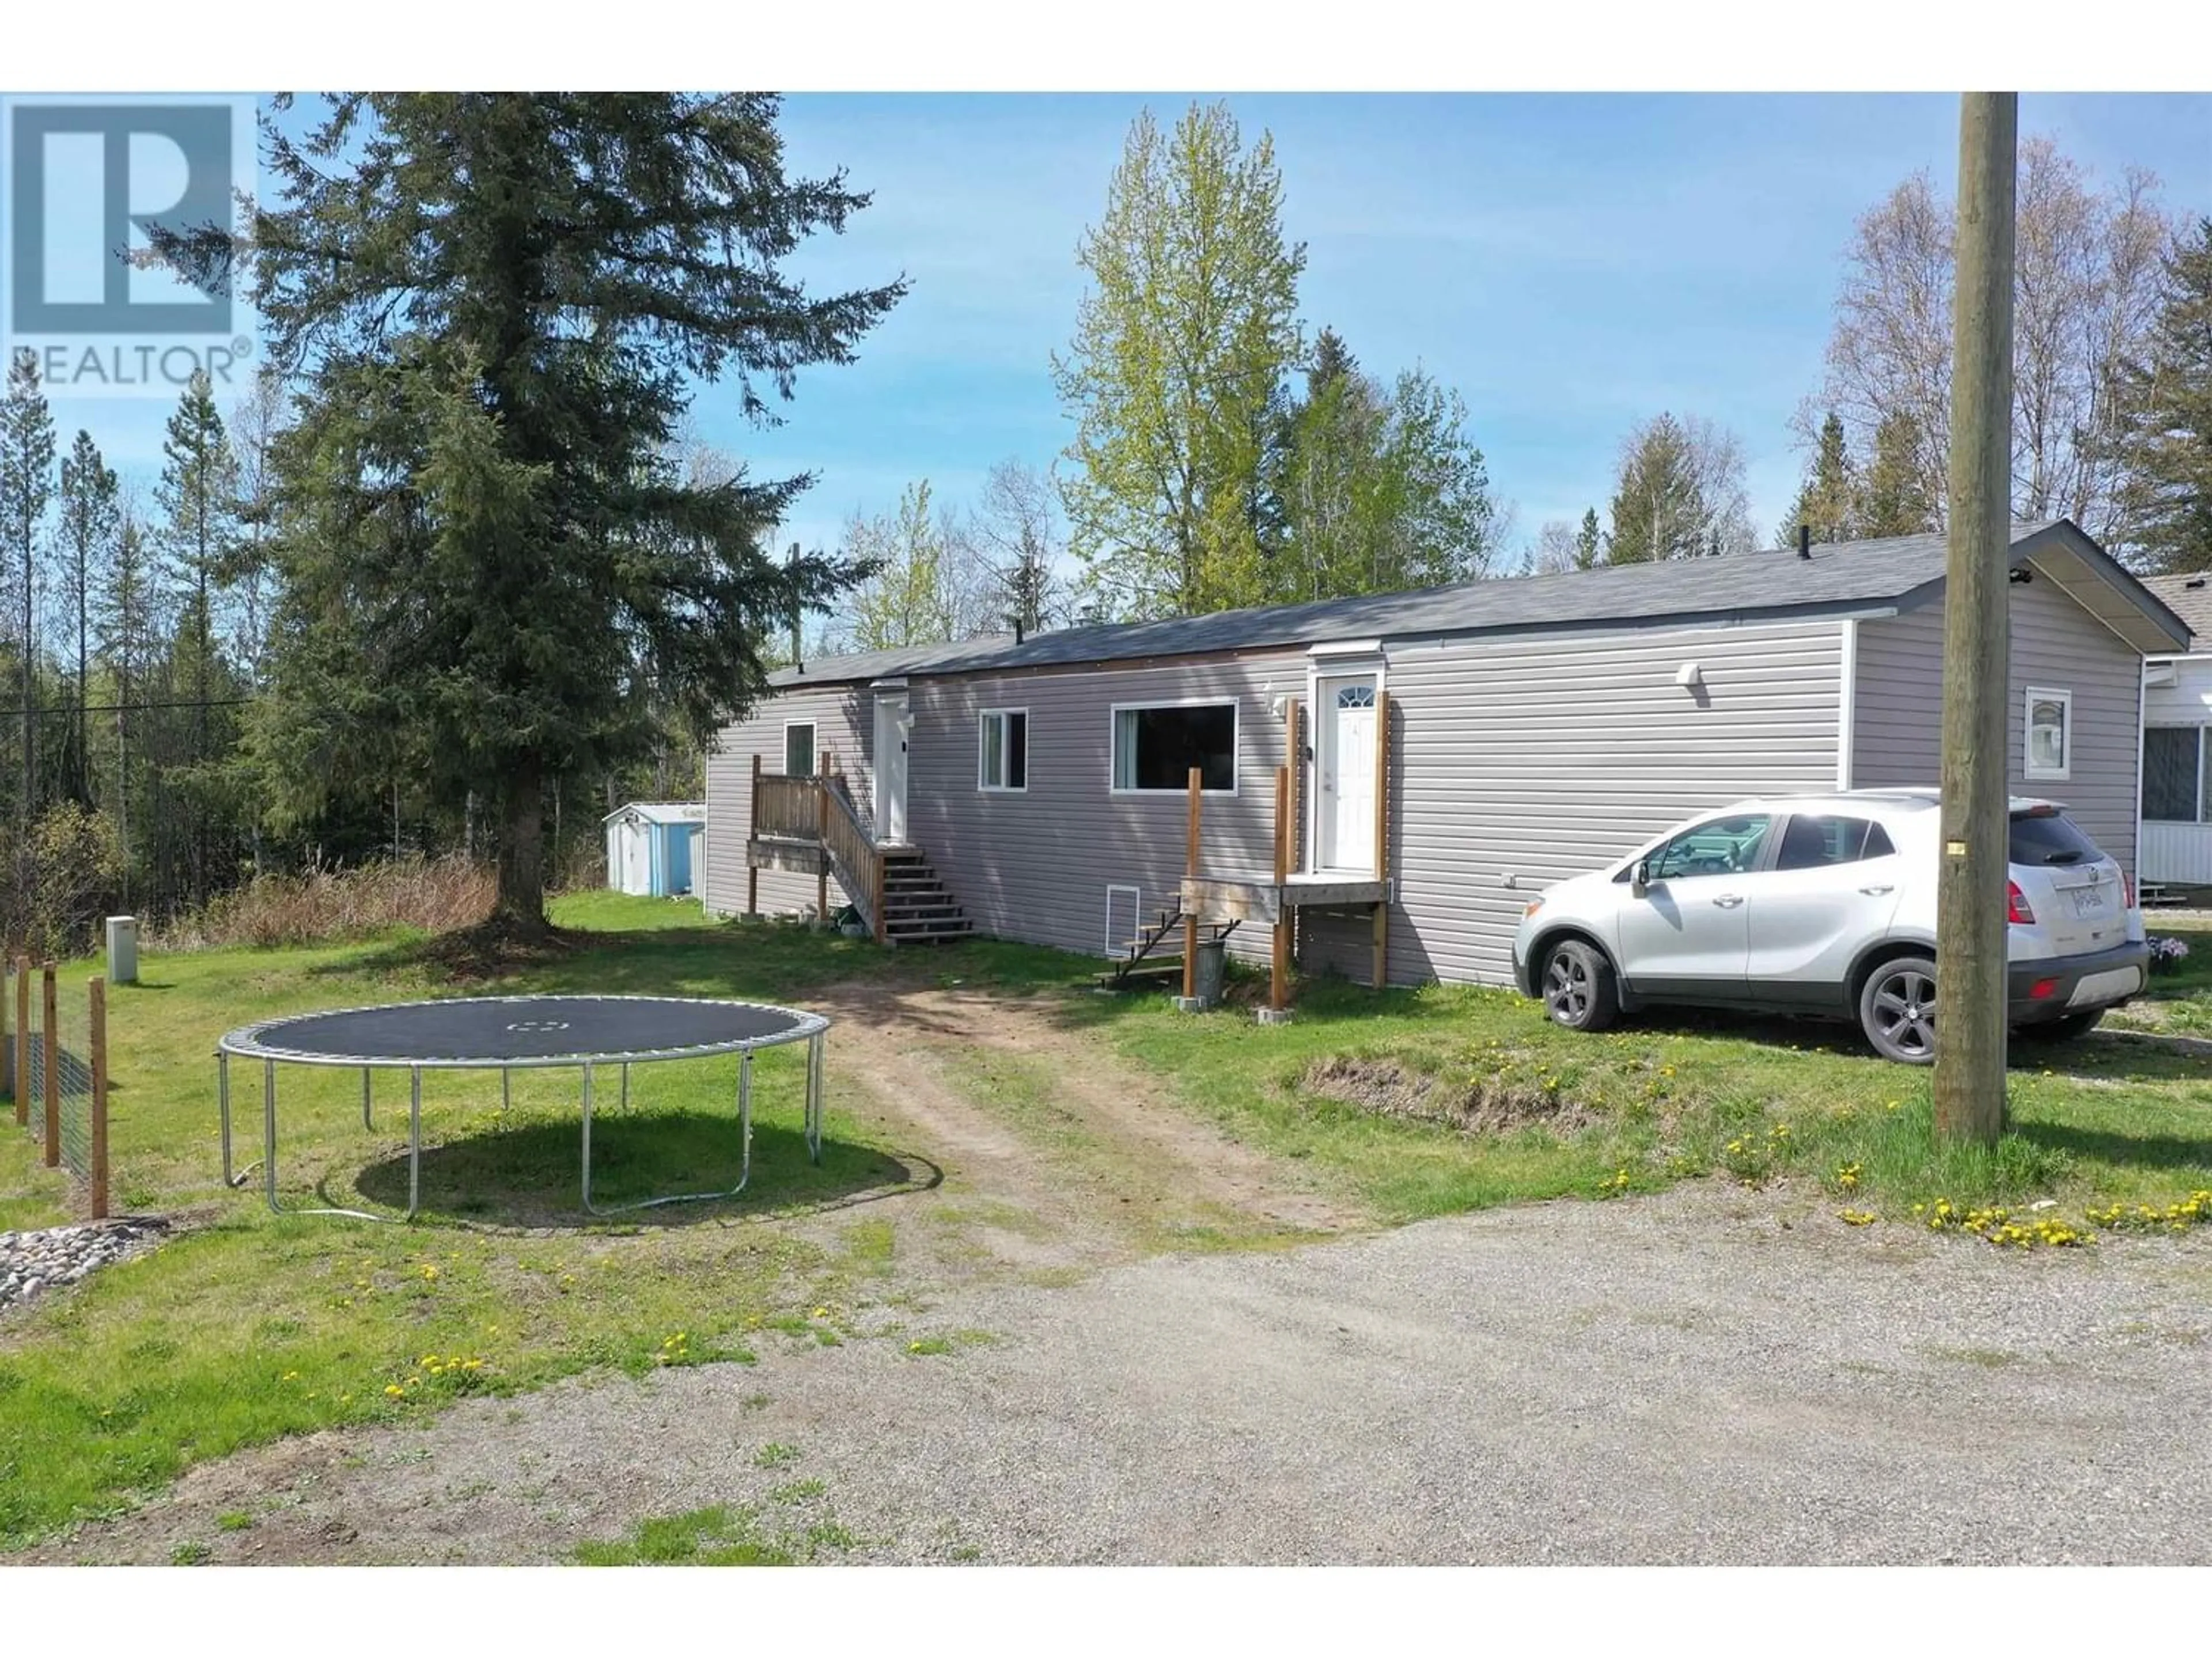 Frontside or backside of a home for 22 3387 RED BLUFF ROAD, Quesnel British Columbia V2J6G6